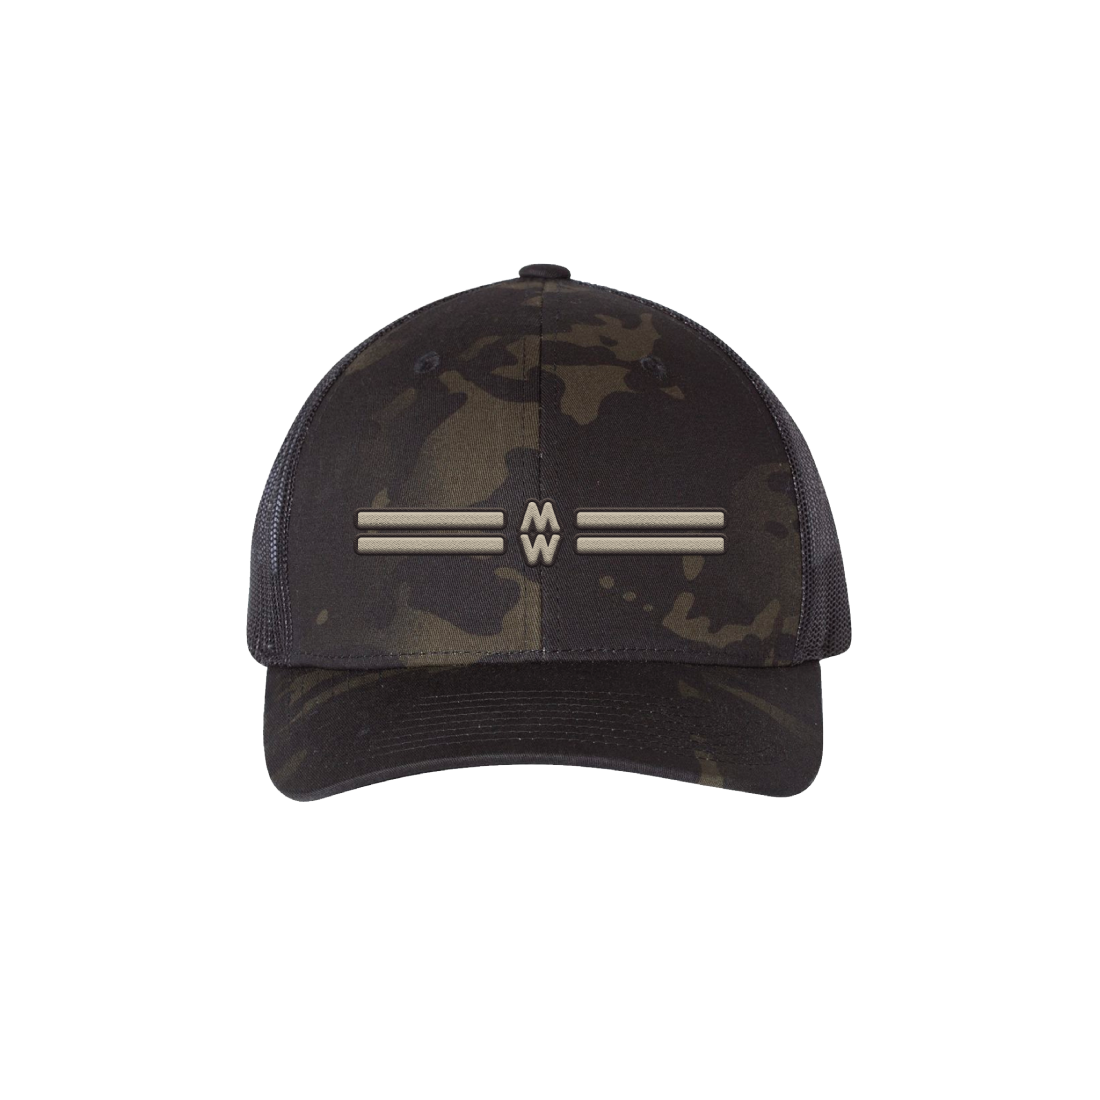 One Thing At A Time One Year Anniversary MW Logo Hat Front